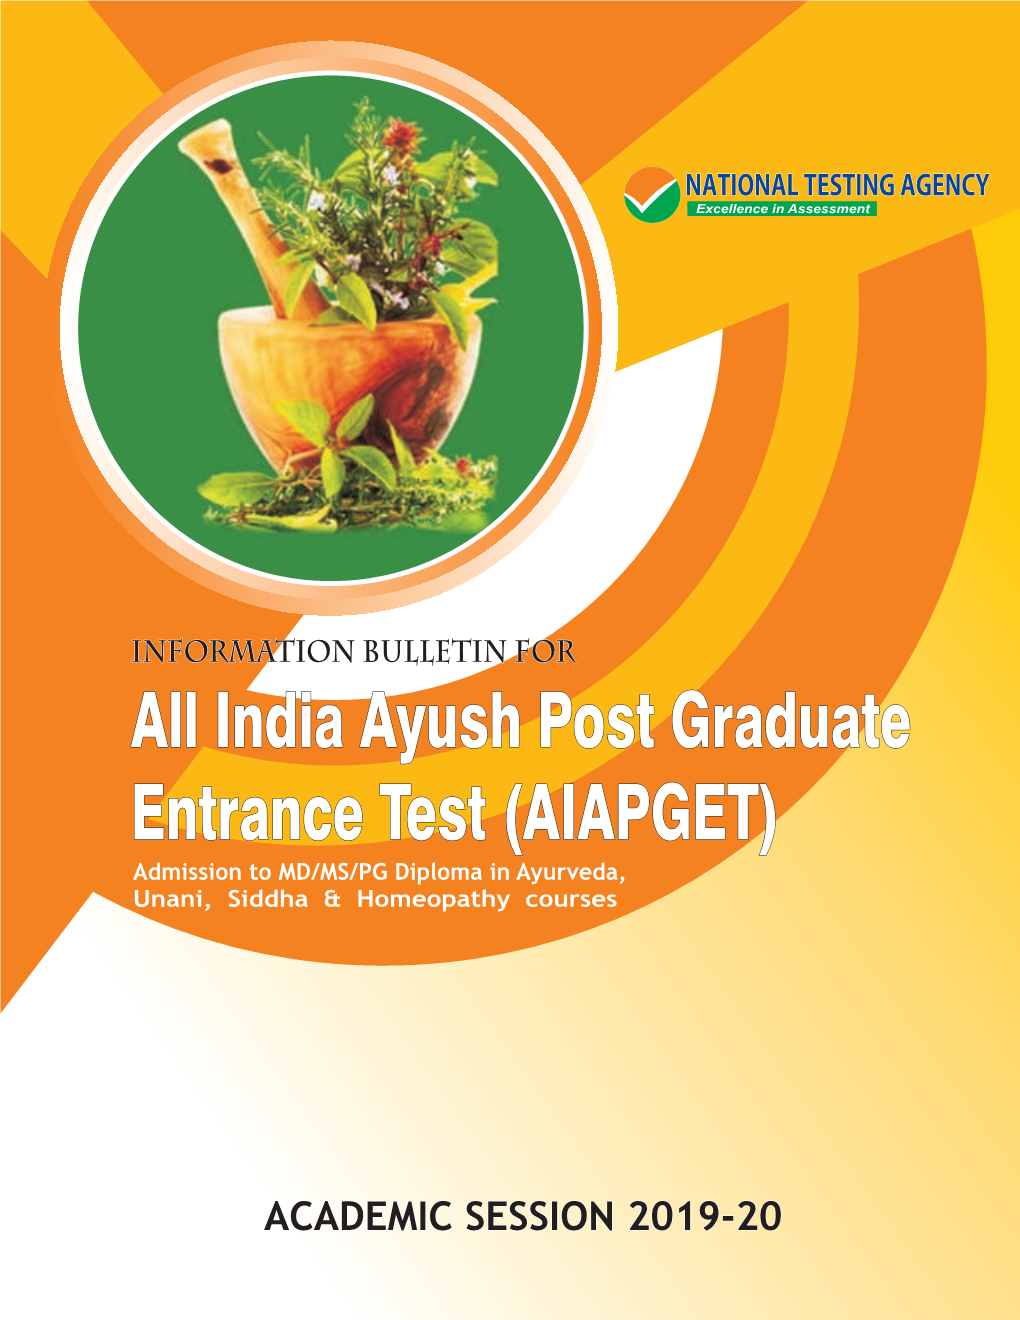 AIAPGET) Admission to MD/MS/PG Diploma in Ayurveda, Unani, Siddha & Homeopathy Courses